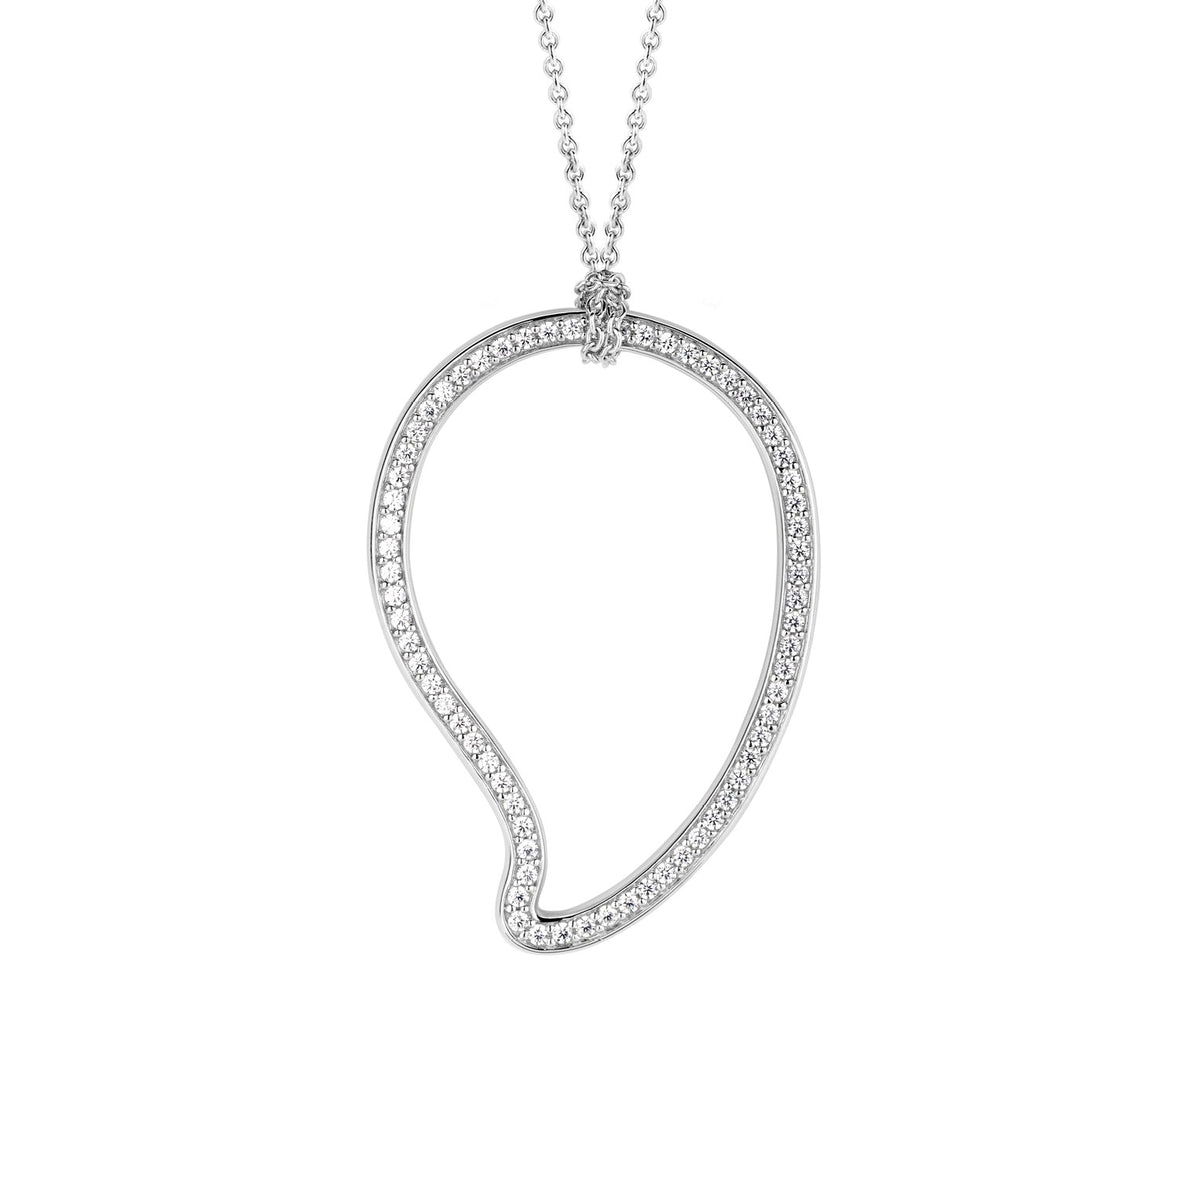 TI SENTO Sterling Silver Necklace with Paisley Pendant